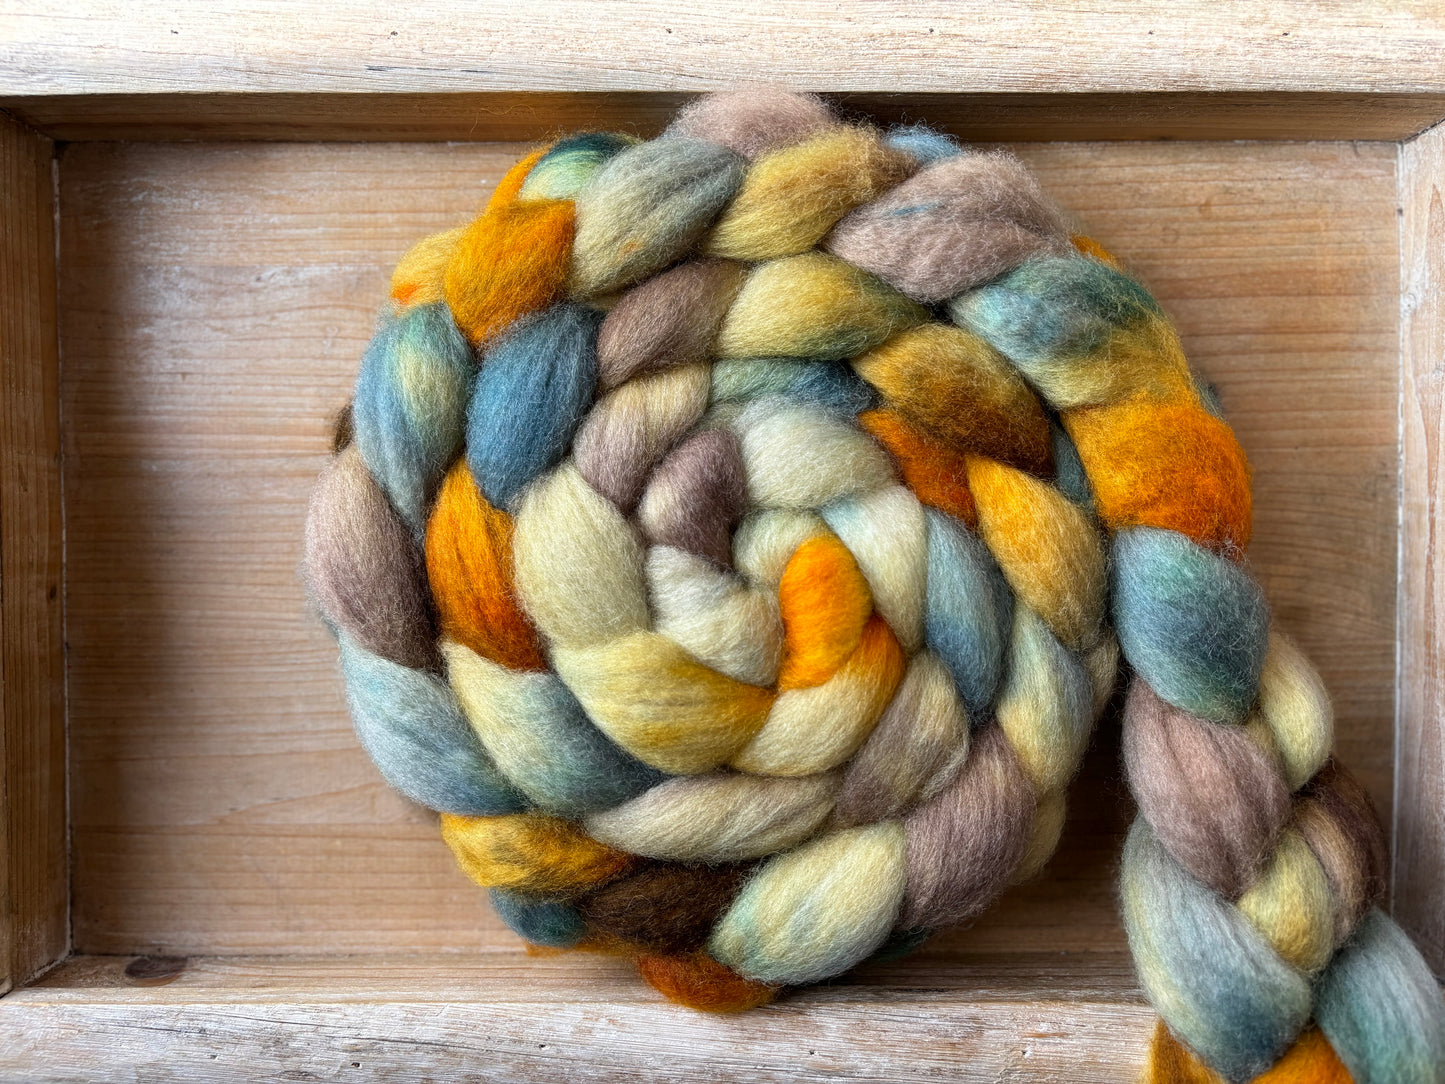 100 grams of Spinning Fibre - Bluefaced Leicester Wool - 26 Micron - Hand Dyed Combed Top